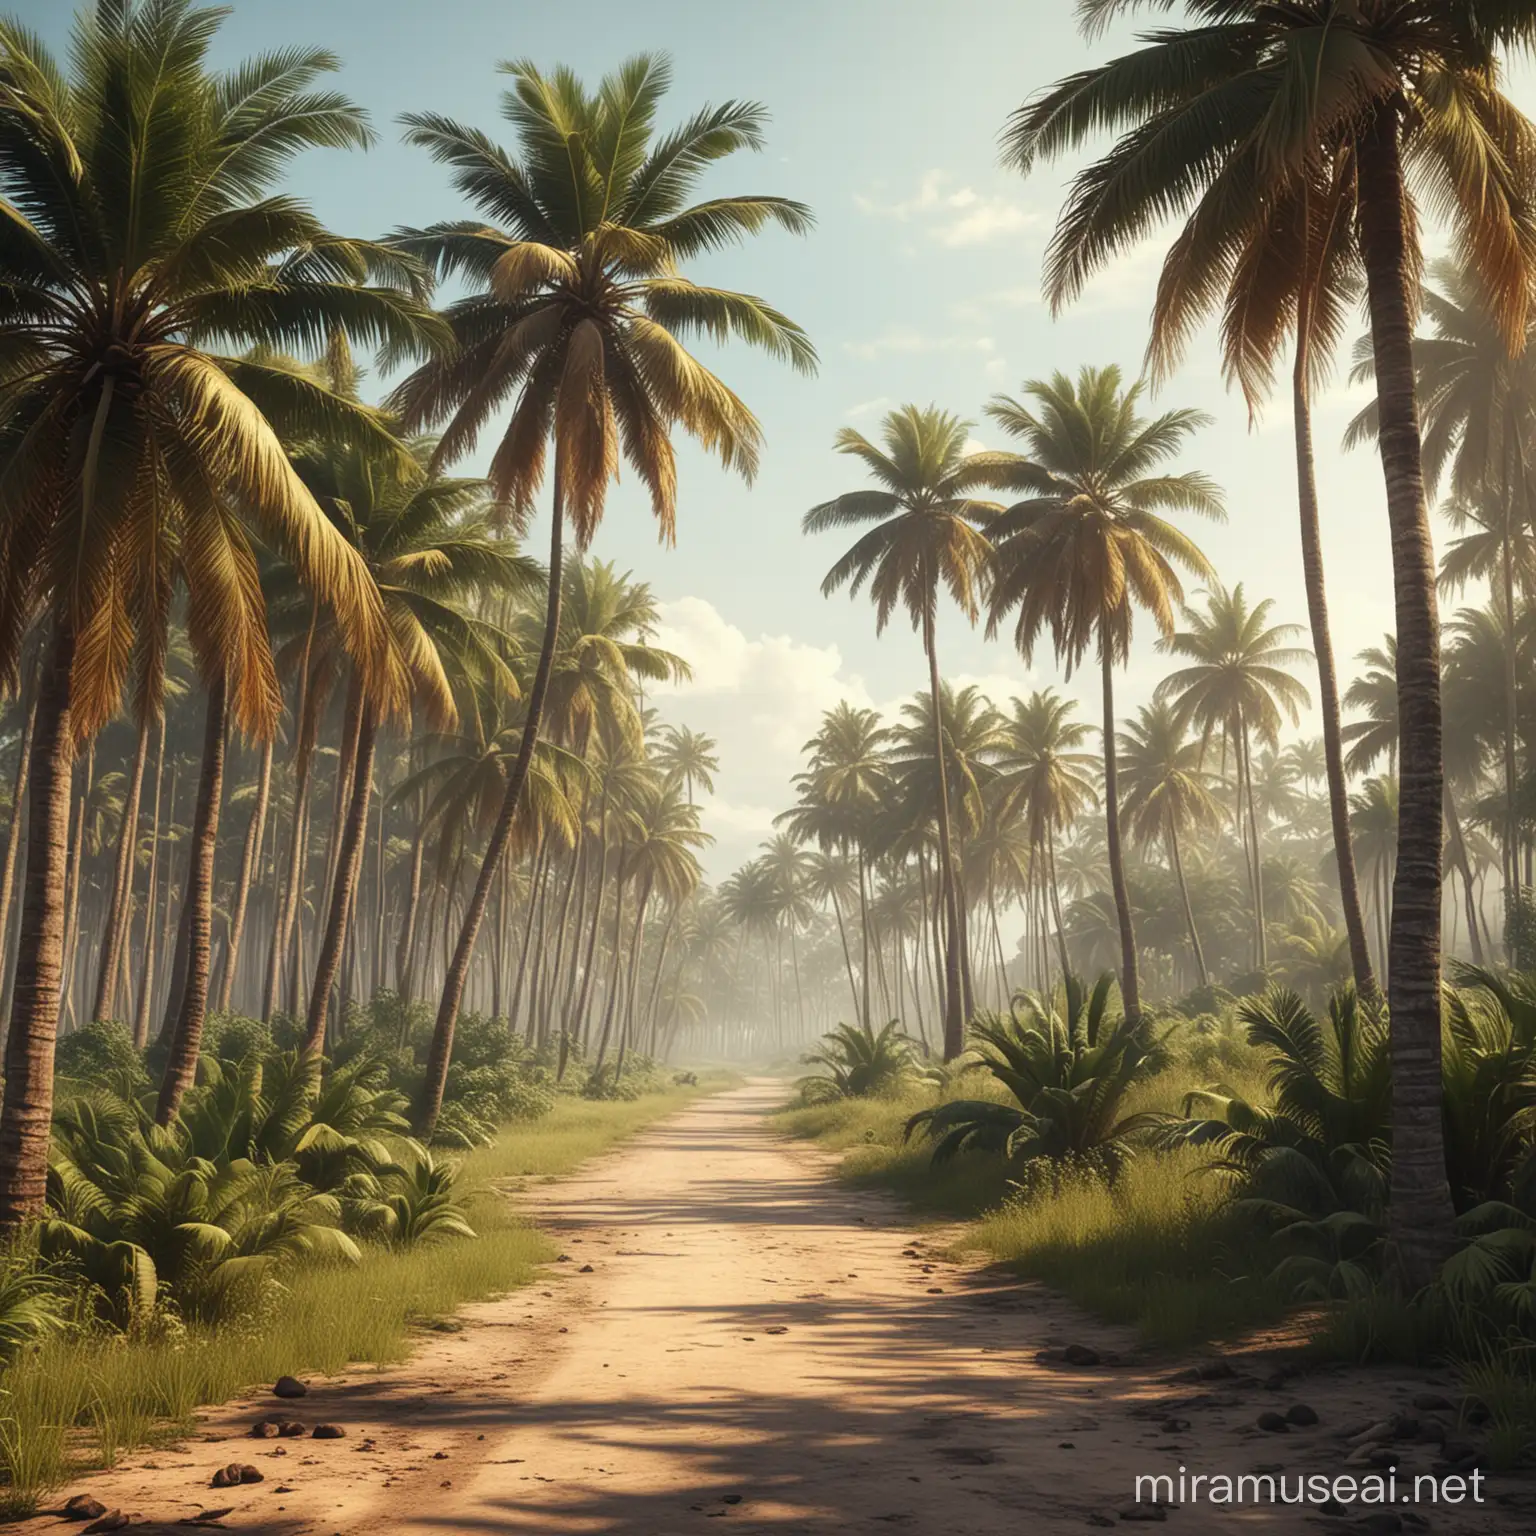 rural India landscape, palm trees, tropical part of India, lowland. realistic details, HD